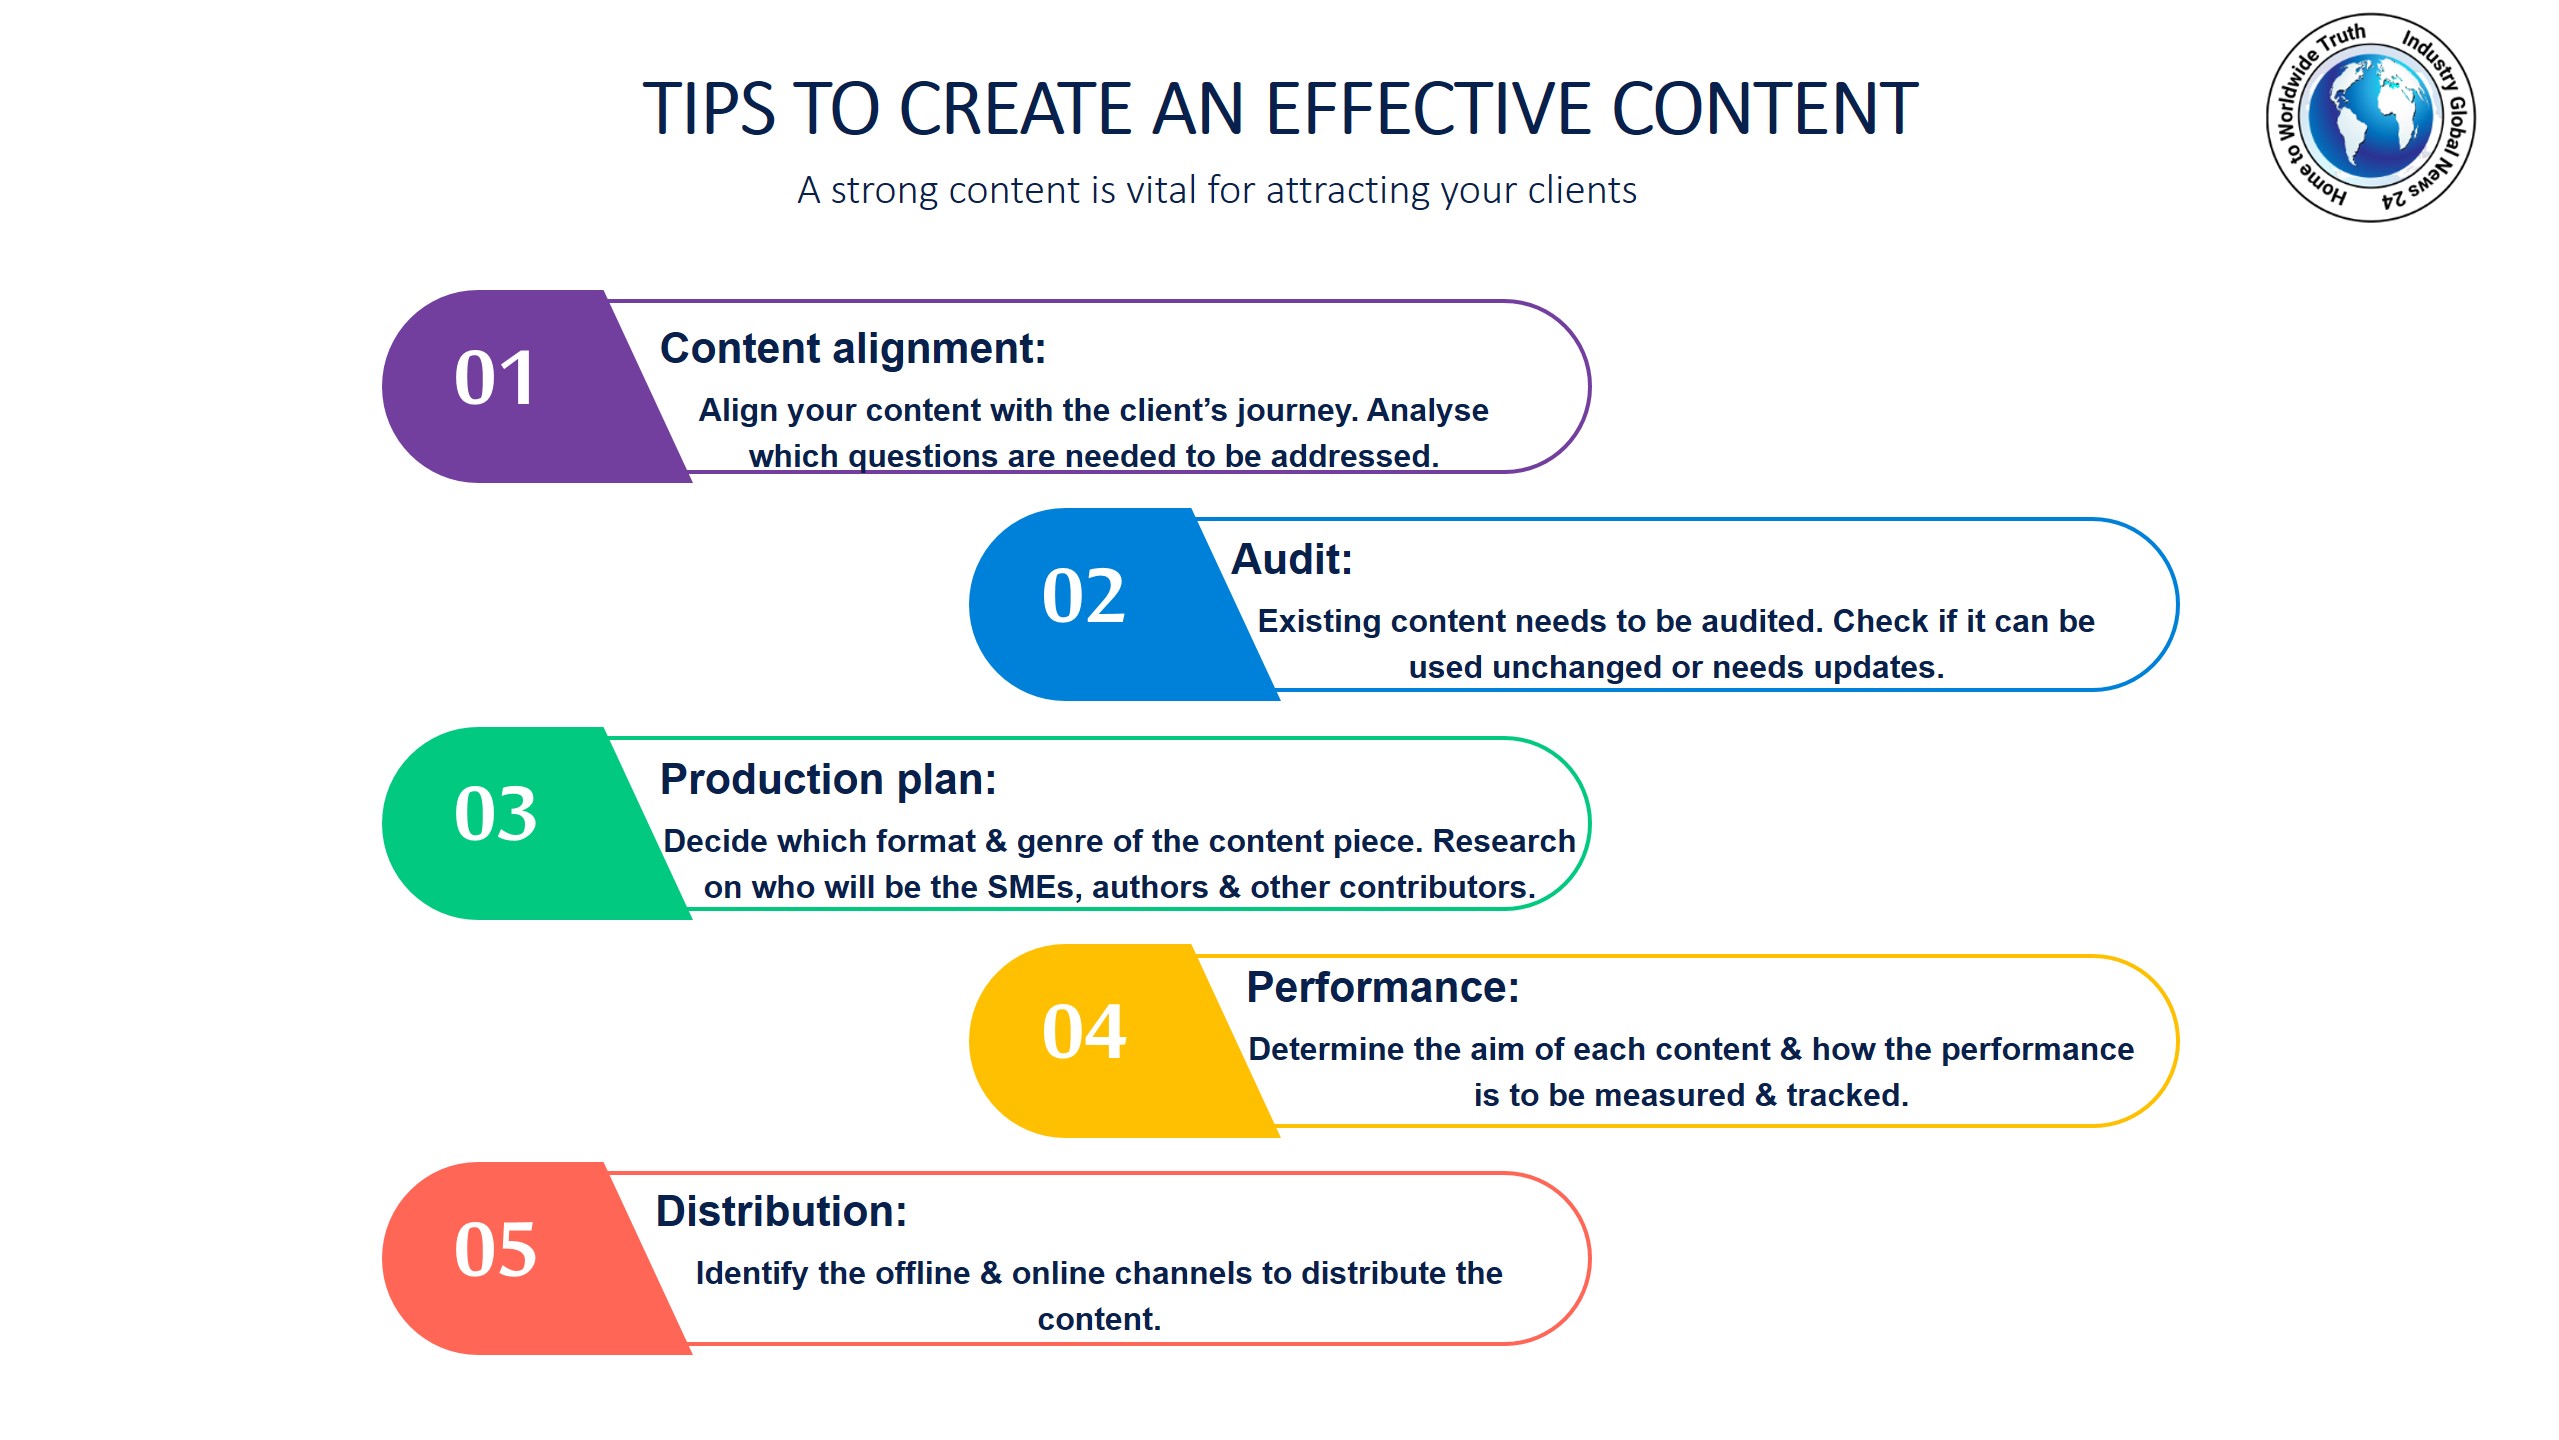 Tips to create an effective content